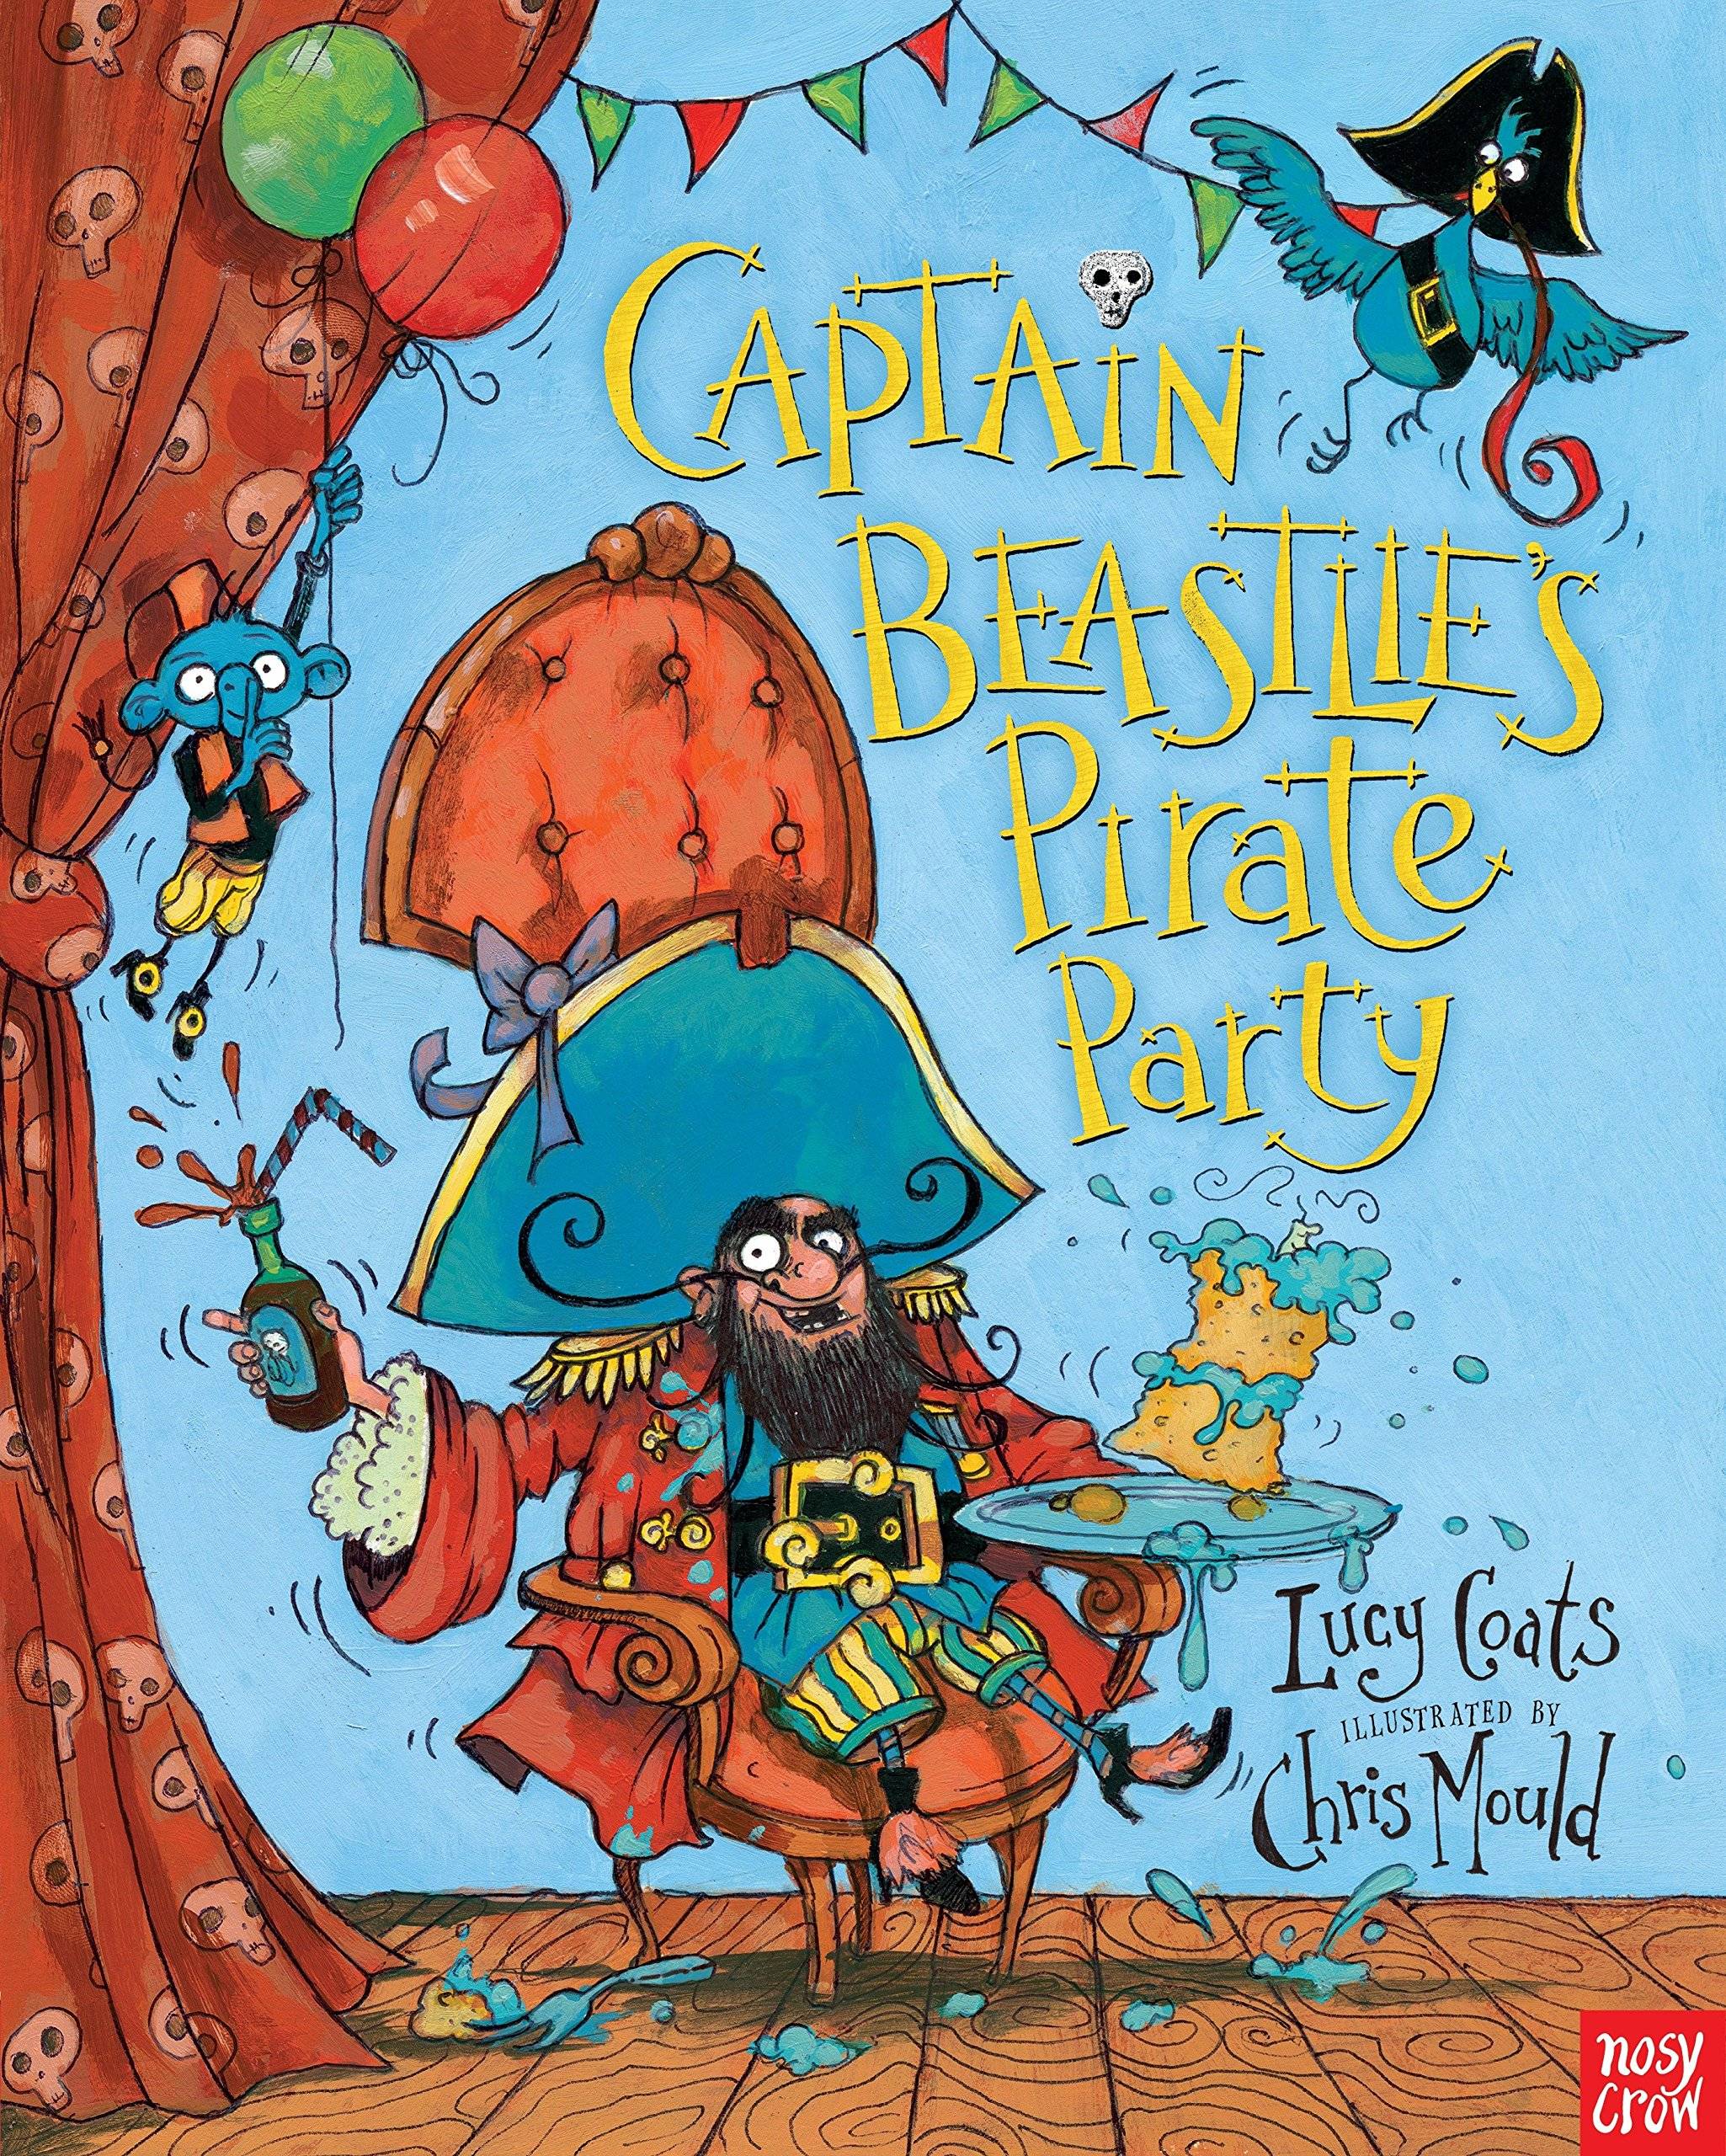 IMG : Captain Beastiles Pirate Party